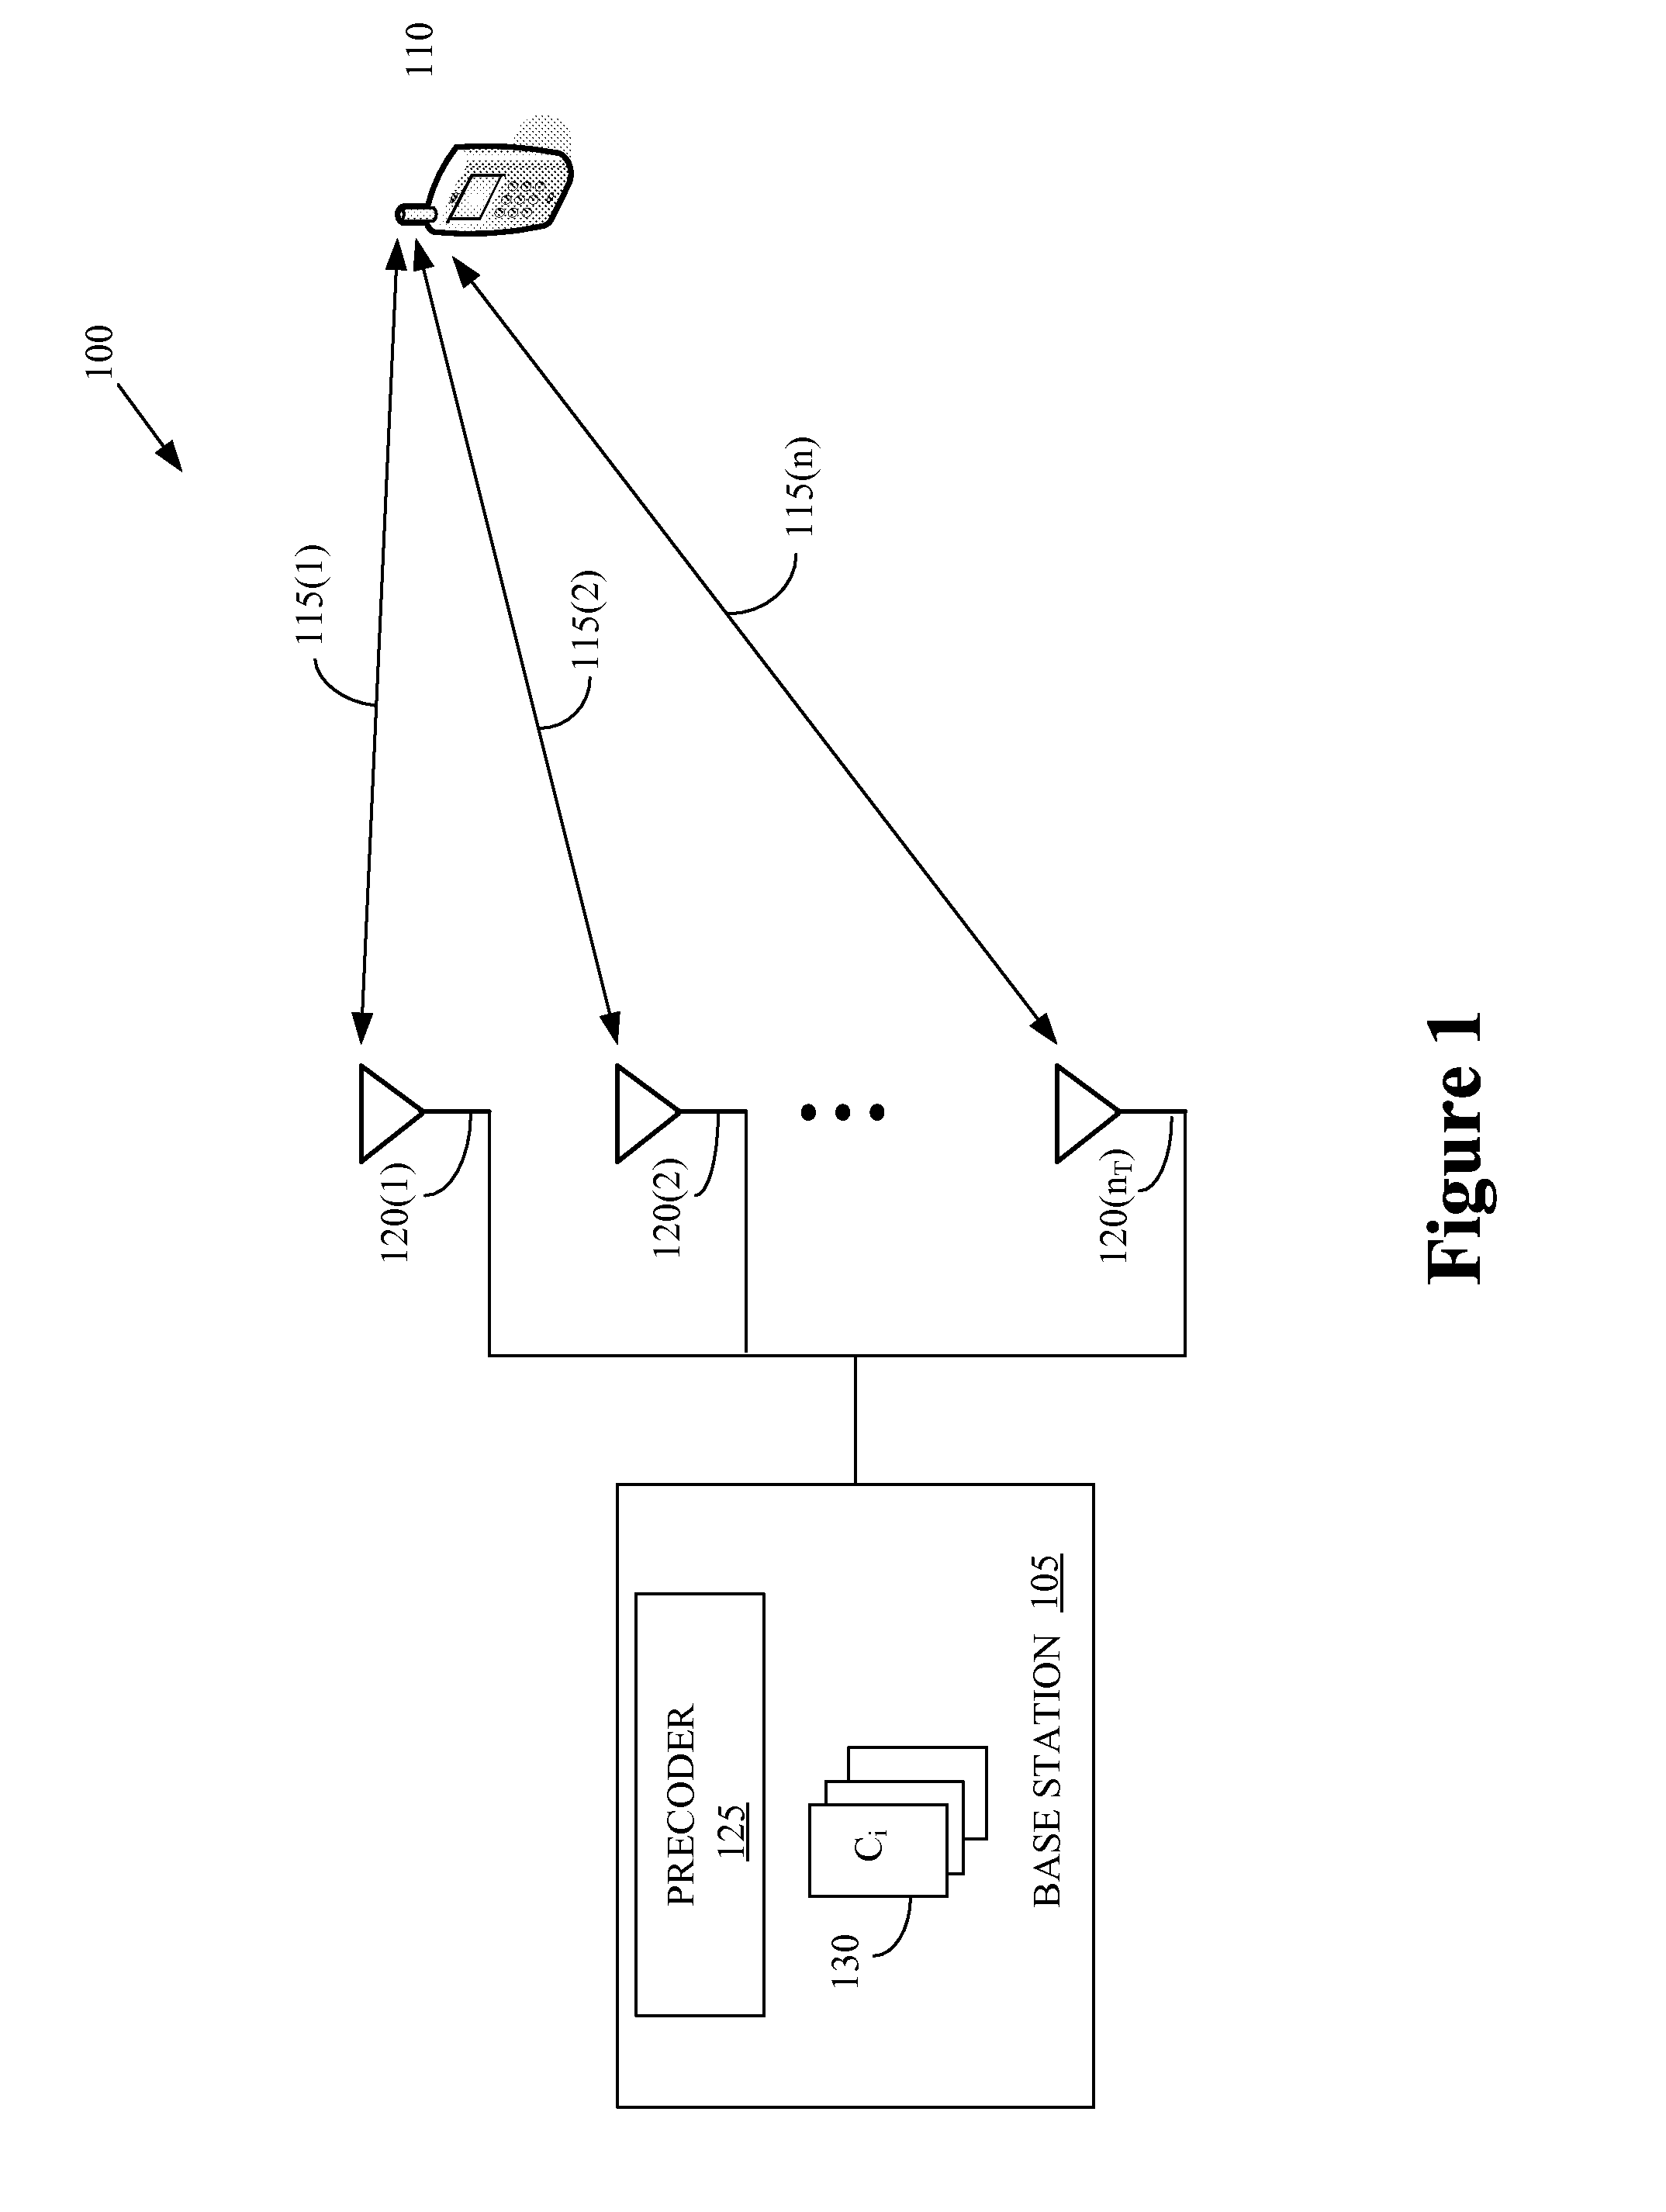 Closed-loop multiple-input-multiple-output scheme for wireless communication based on hierarchical feedback